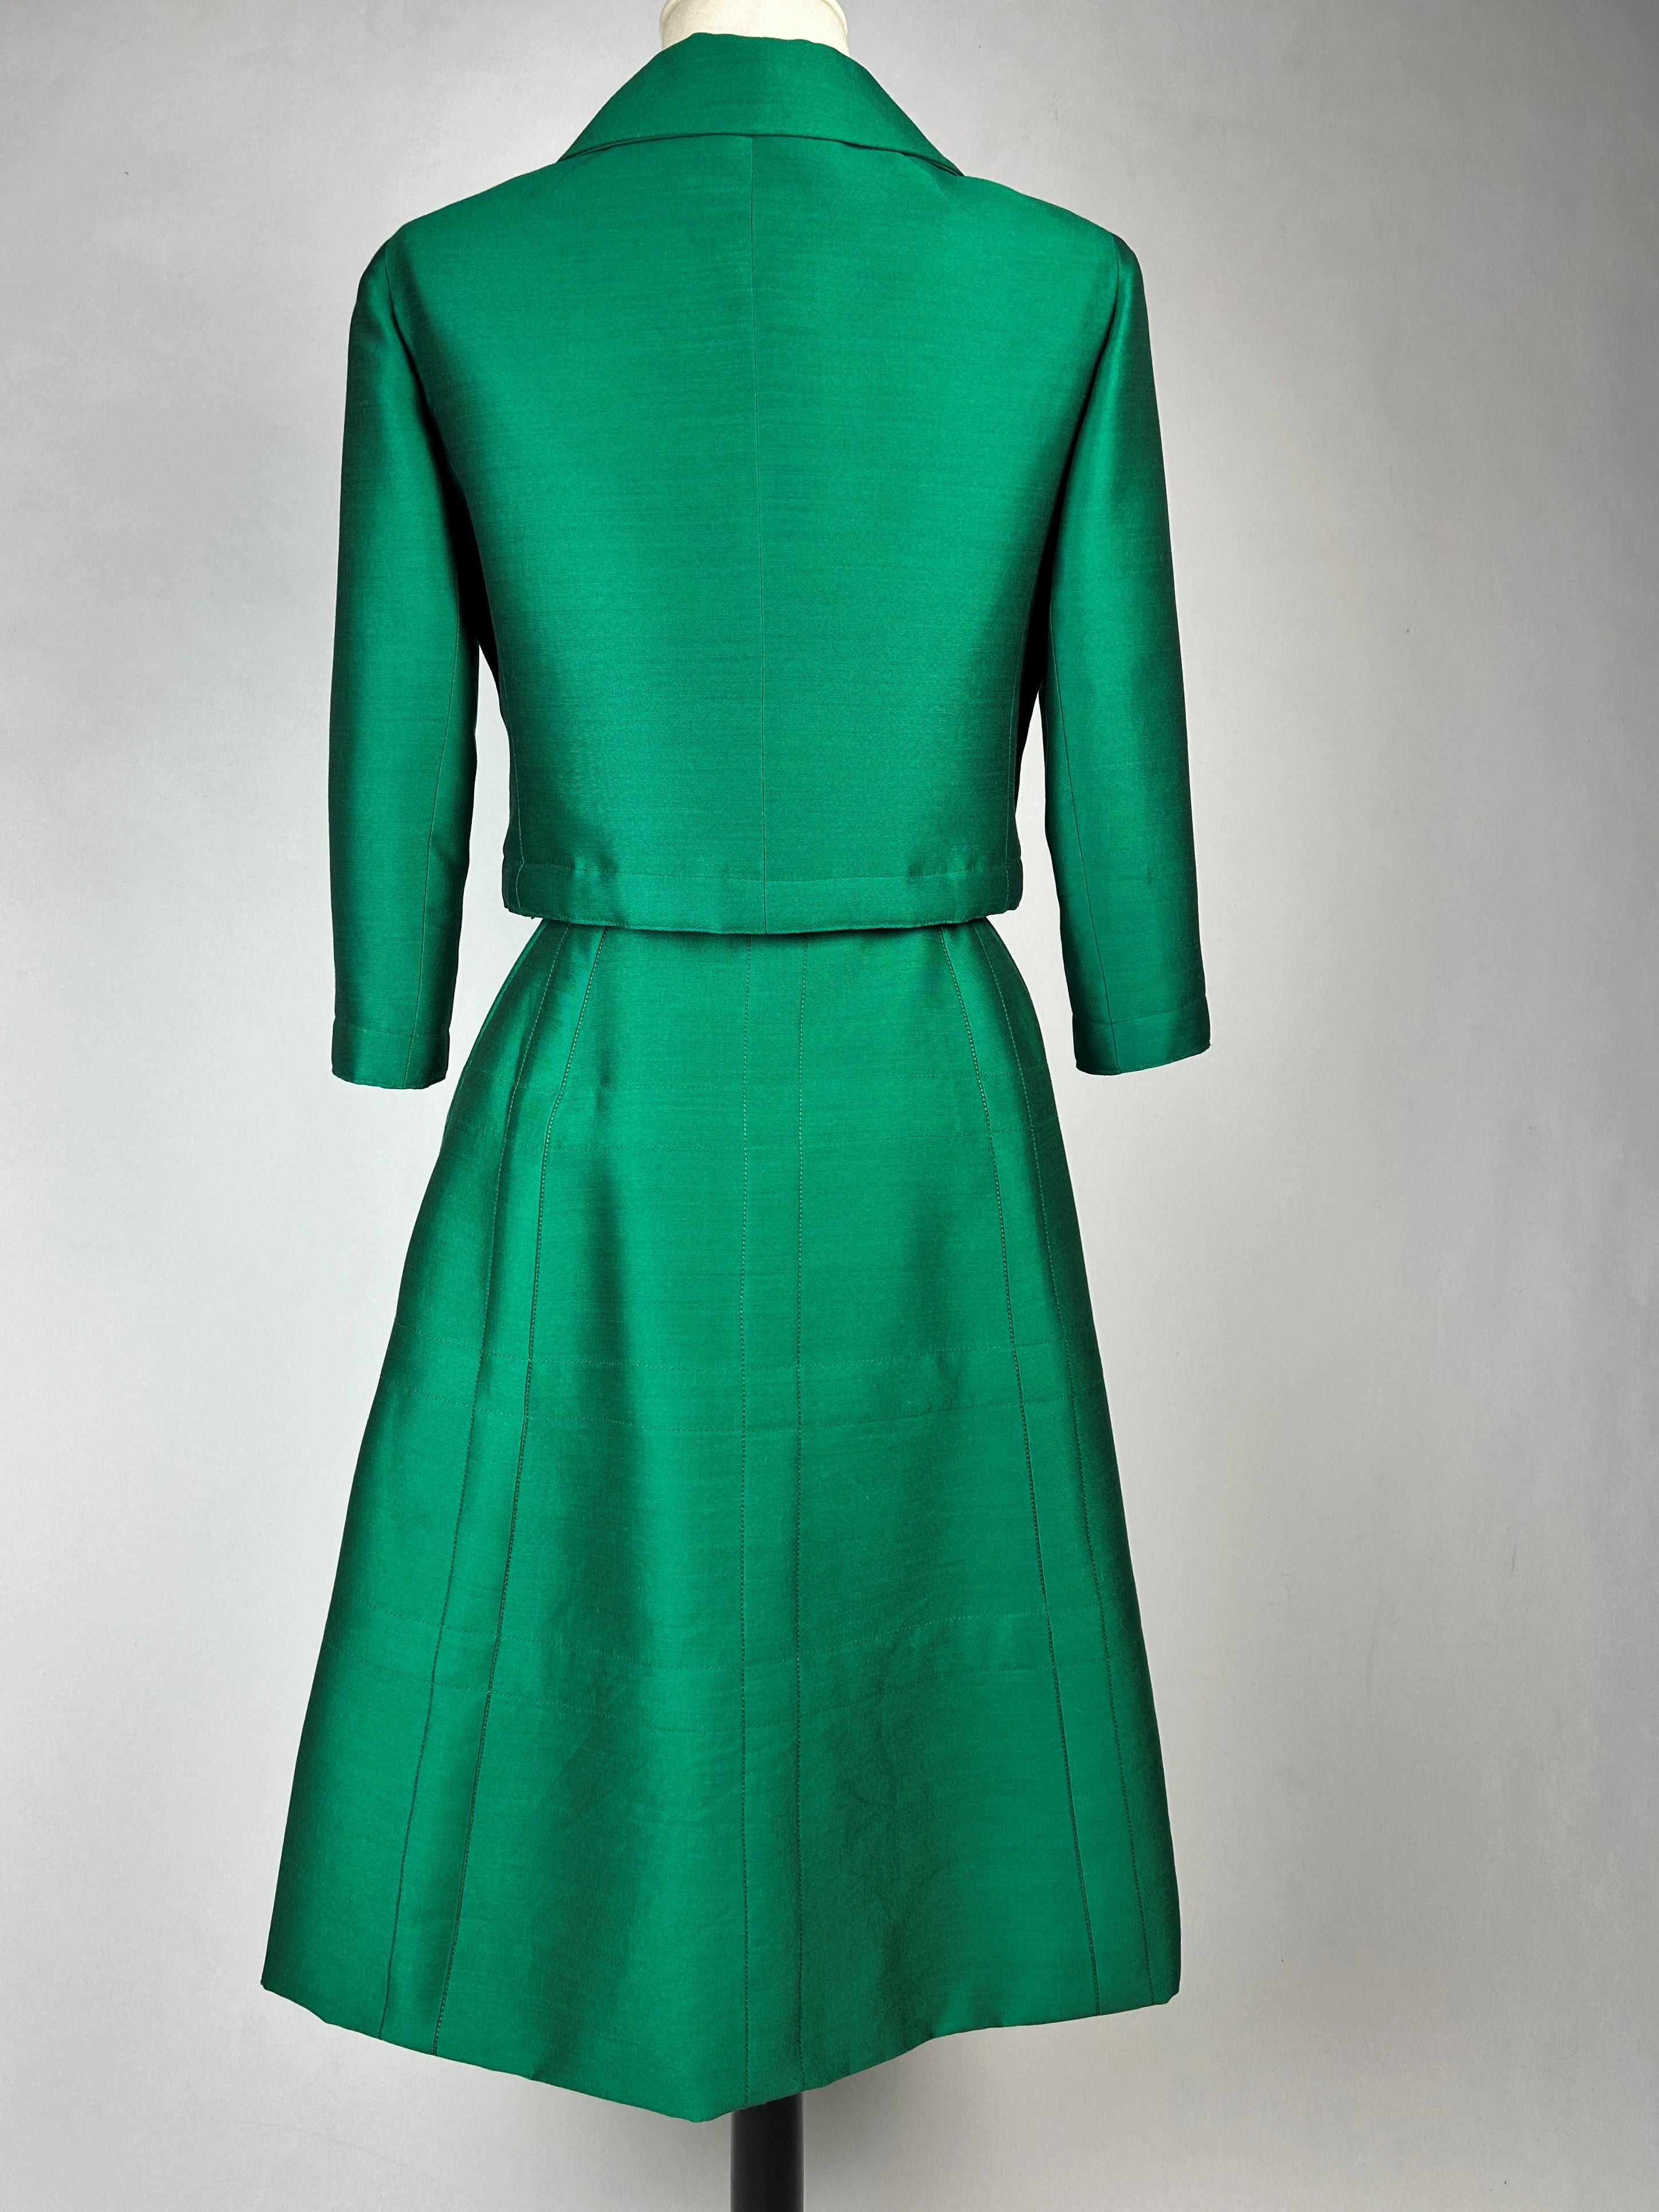 An Emerald Gazar Demi-Couture Skirt Suit by Louis Féraud Circa 1968-1972 For Sale 11